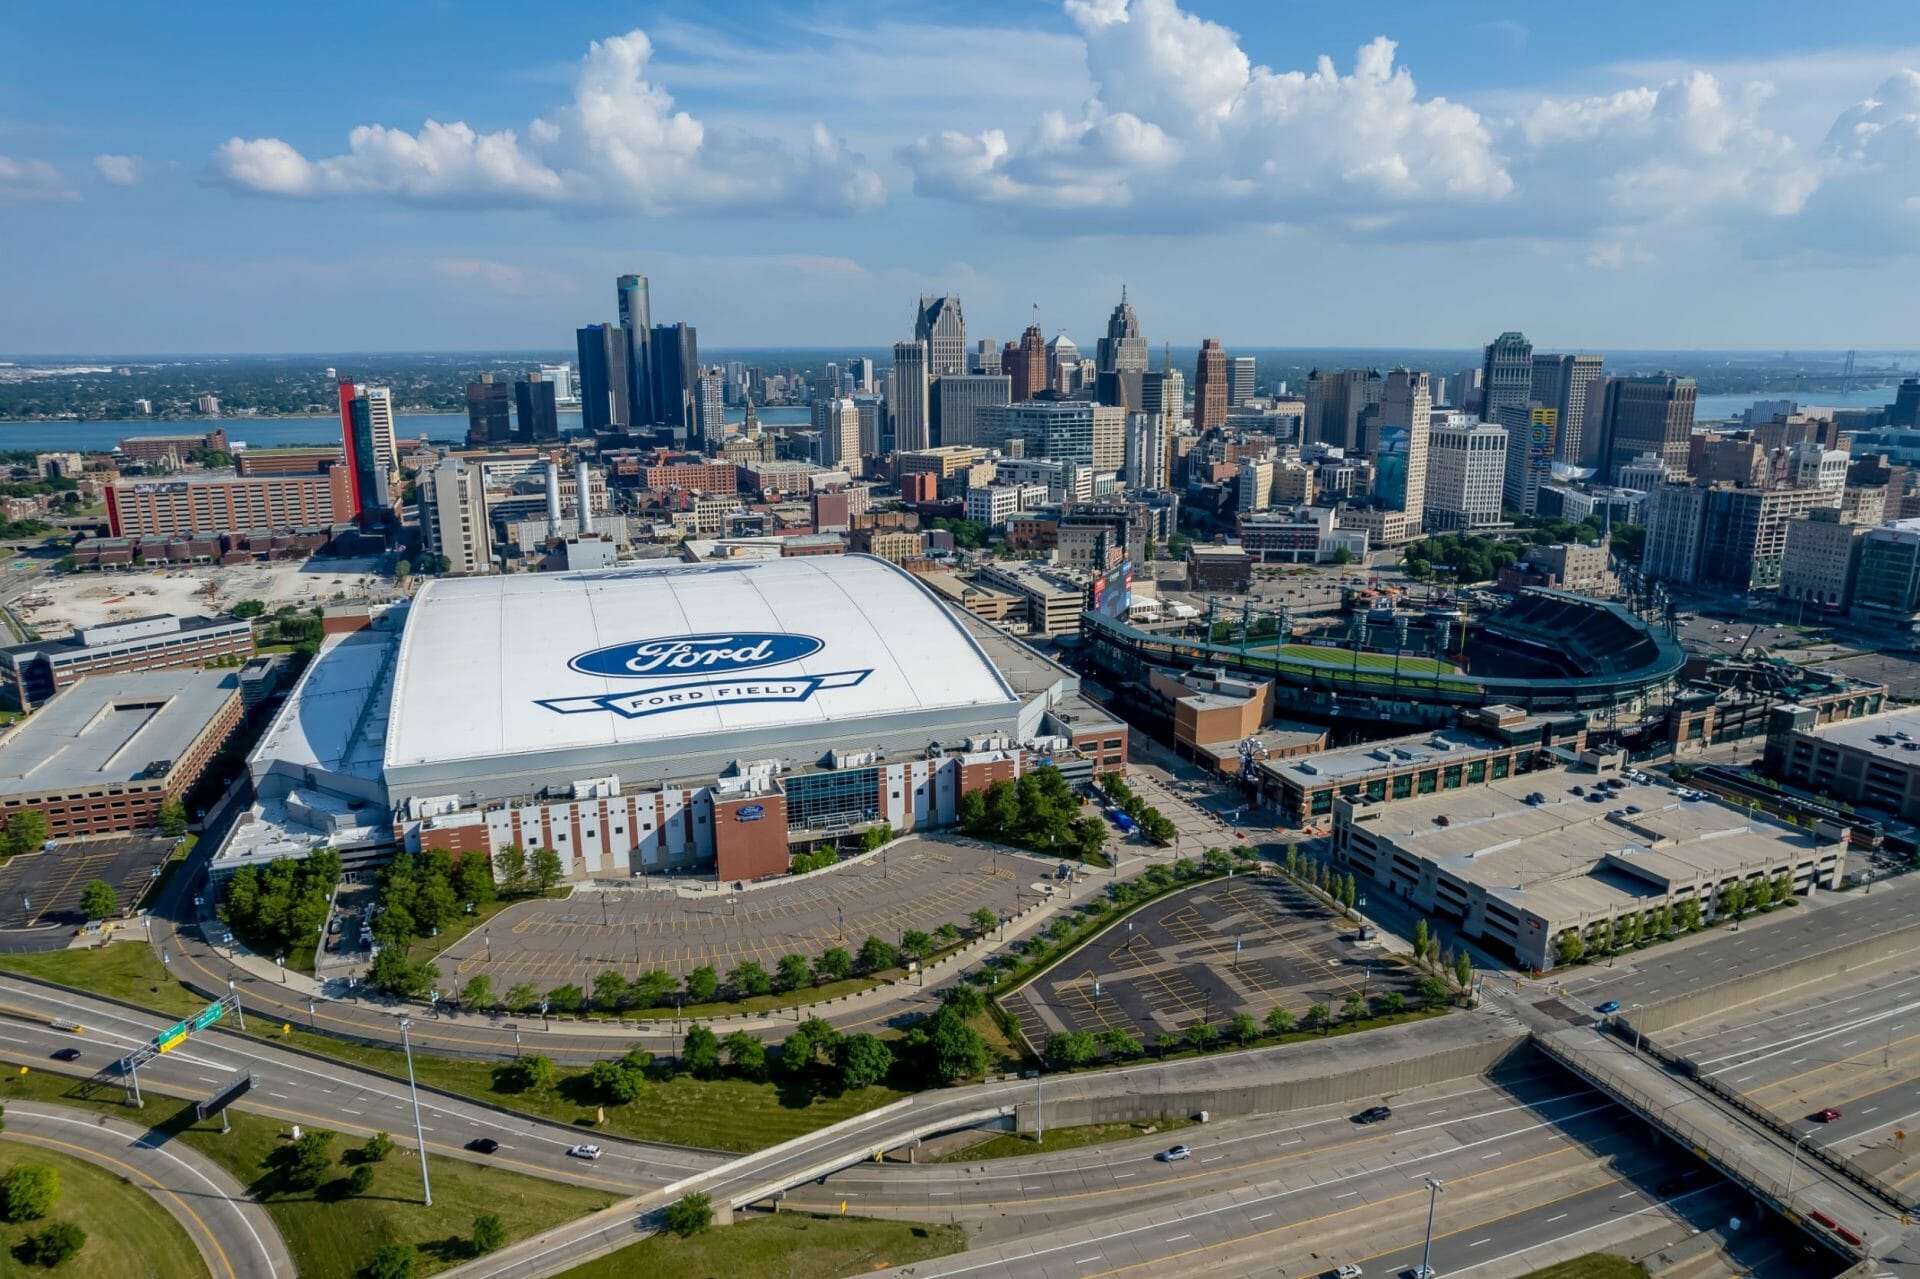 Ford Field: Home of the Detroit Lions, Detroit, Michigan.